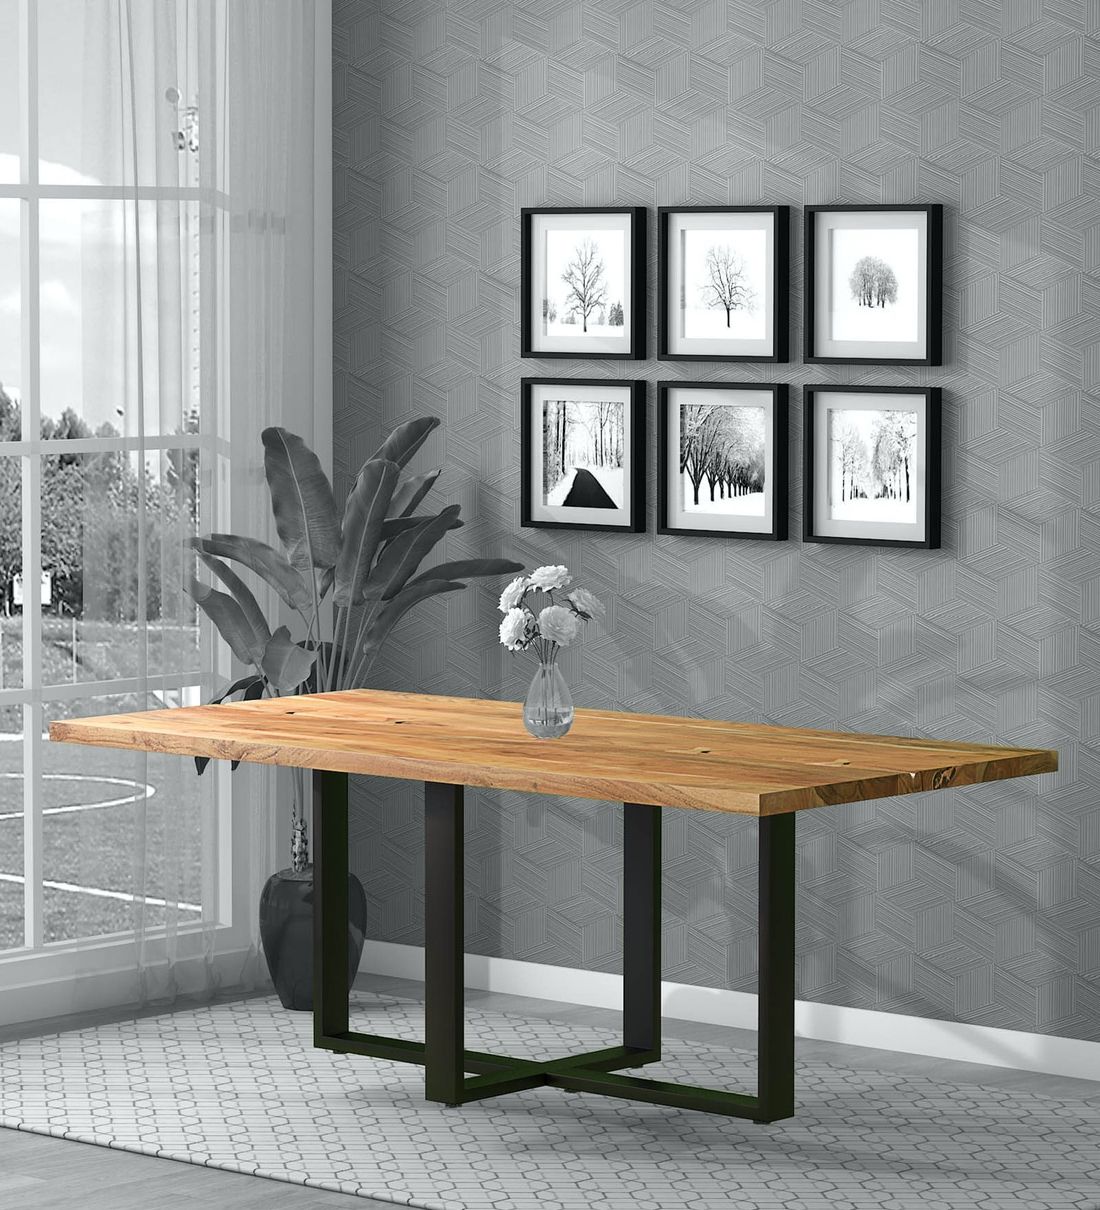 Buy Monarch Solid Wood 8 Seater Dining Table In Natural Acacia Finish With Regard To Favorite Natural Acacia Wood Bistro Dining Sets (View 5 of 15)